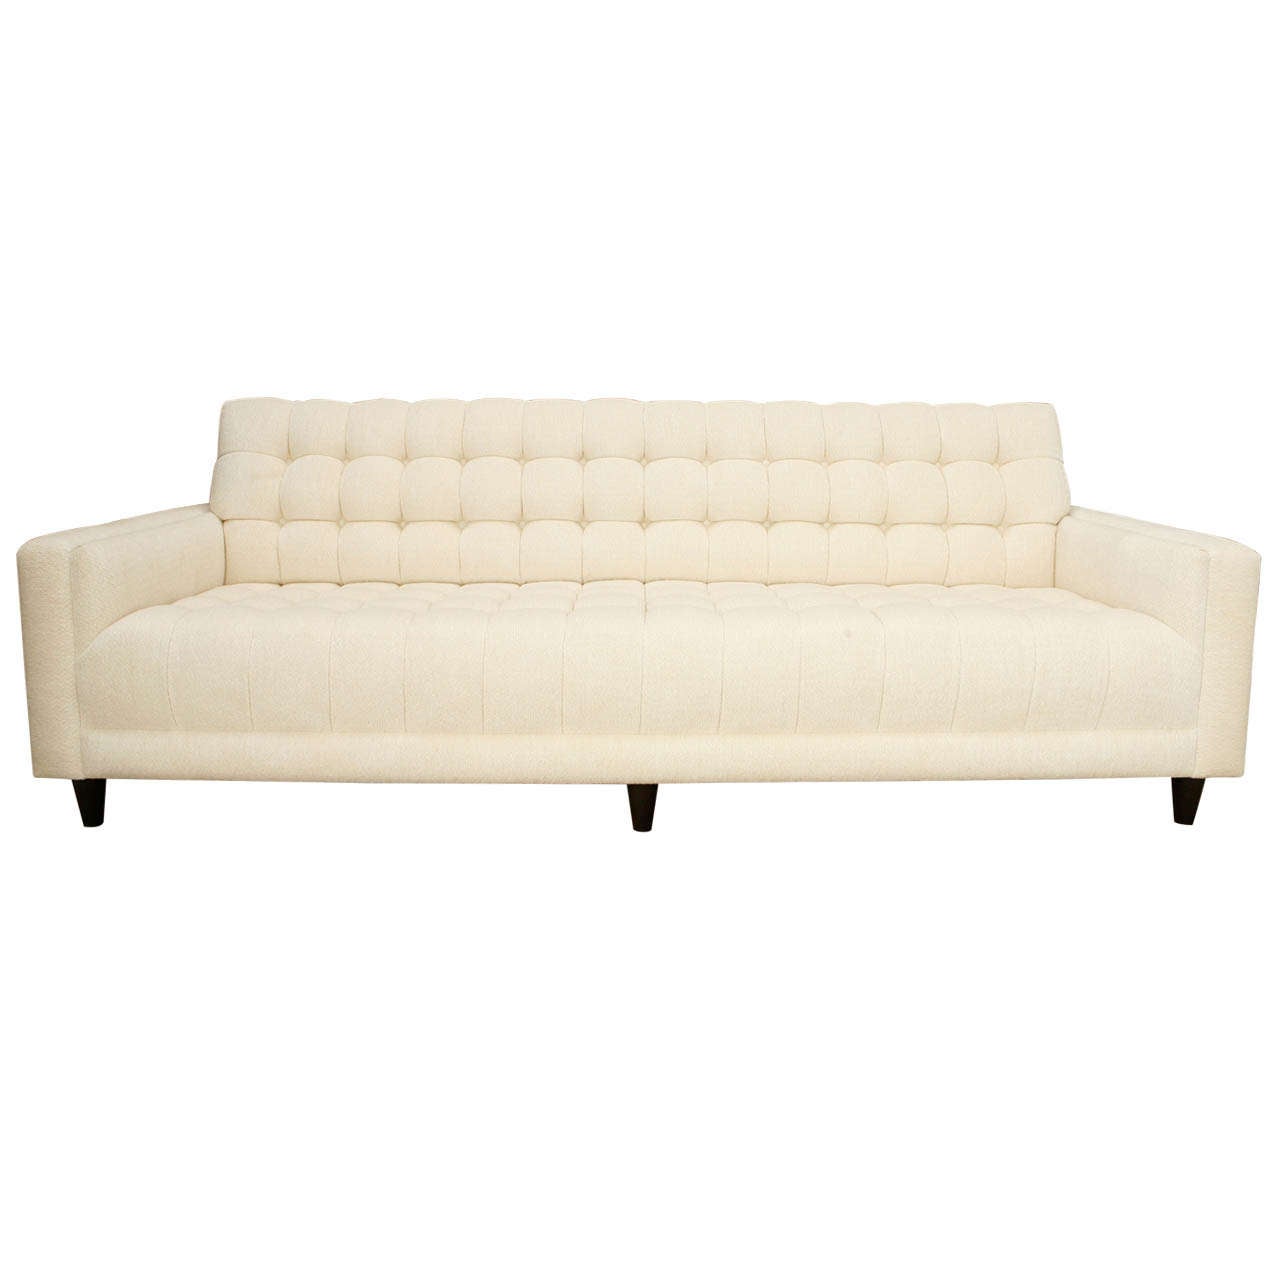 Custom Biscuit-Tufted Sofa by William Haines